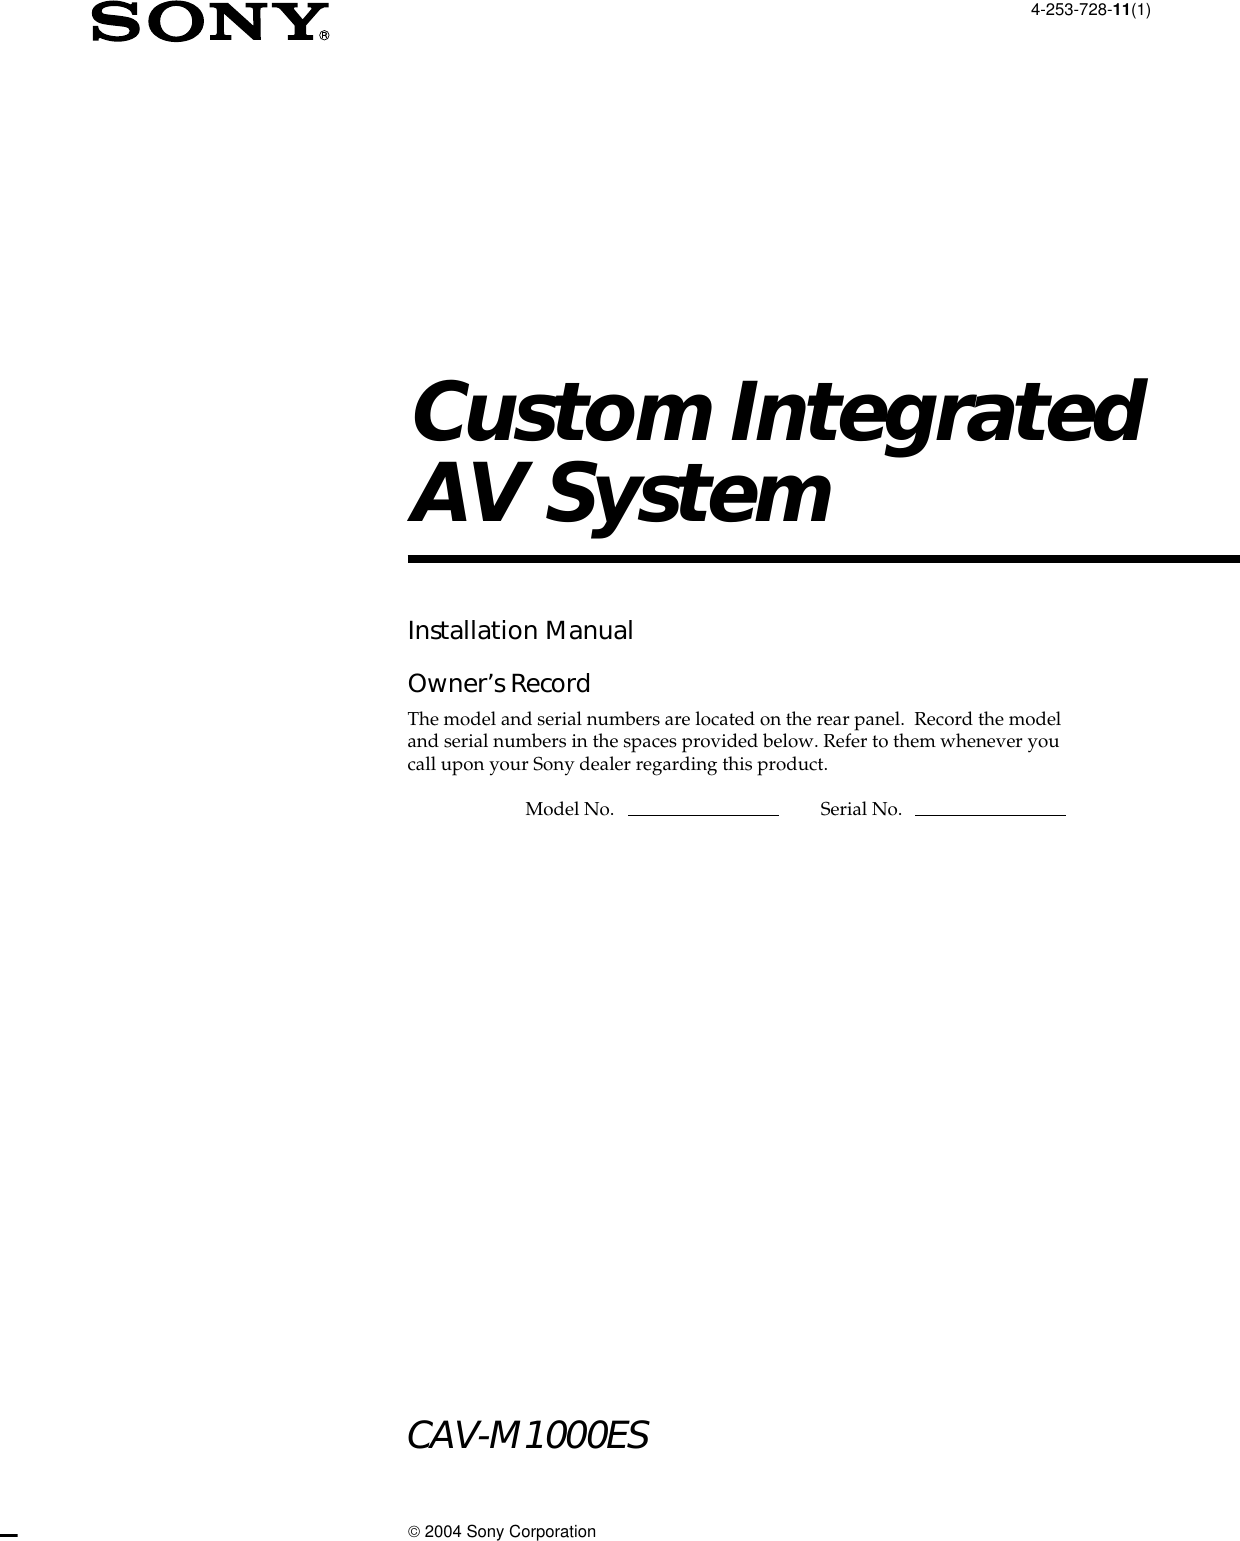 4-253-728-11(1)Custom IntegratedAV System 2004 Sony CorporationCAV-M1000ESInstallation ManualOwner’s RecordThe model and serial numbers are located on the rear panel.  Record the modeland serial numbers in the spaces provided below. Refer to them whenever youcall upon your Sony dealer regarding this product.Model No. Serial No.